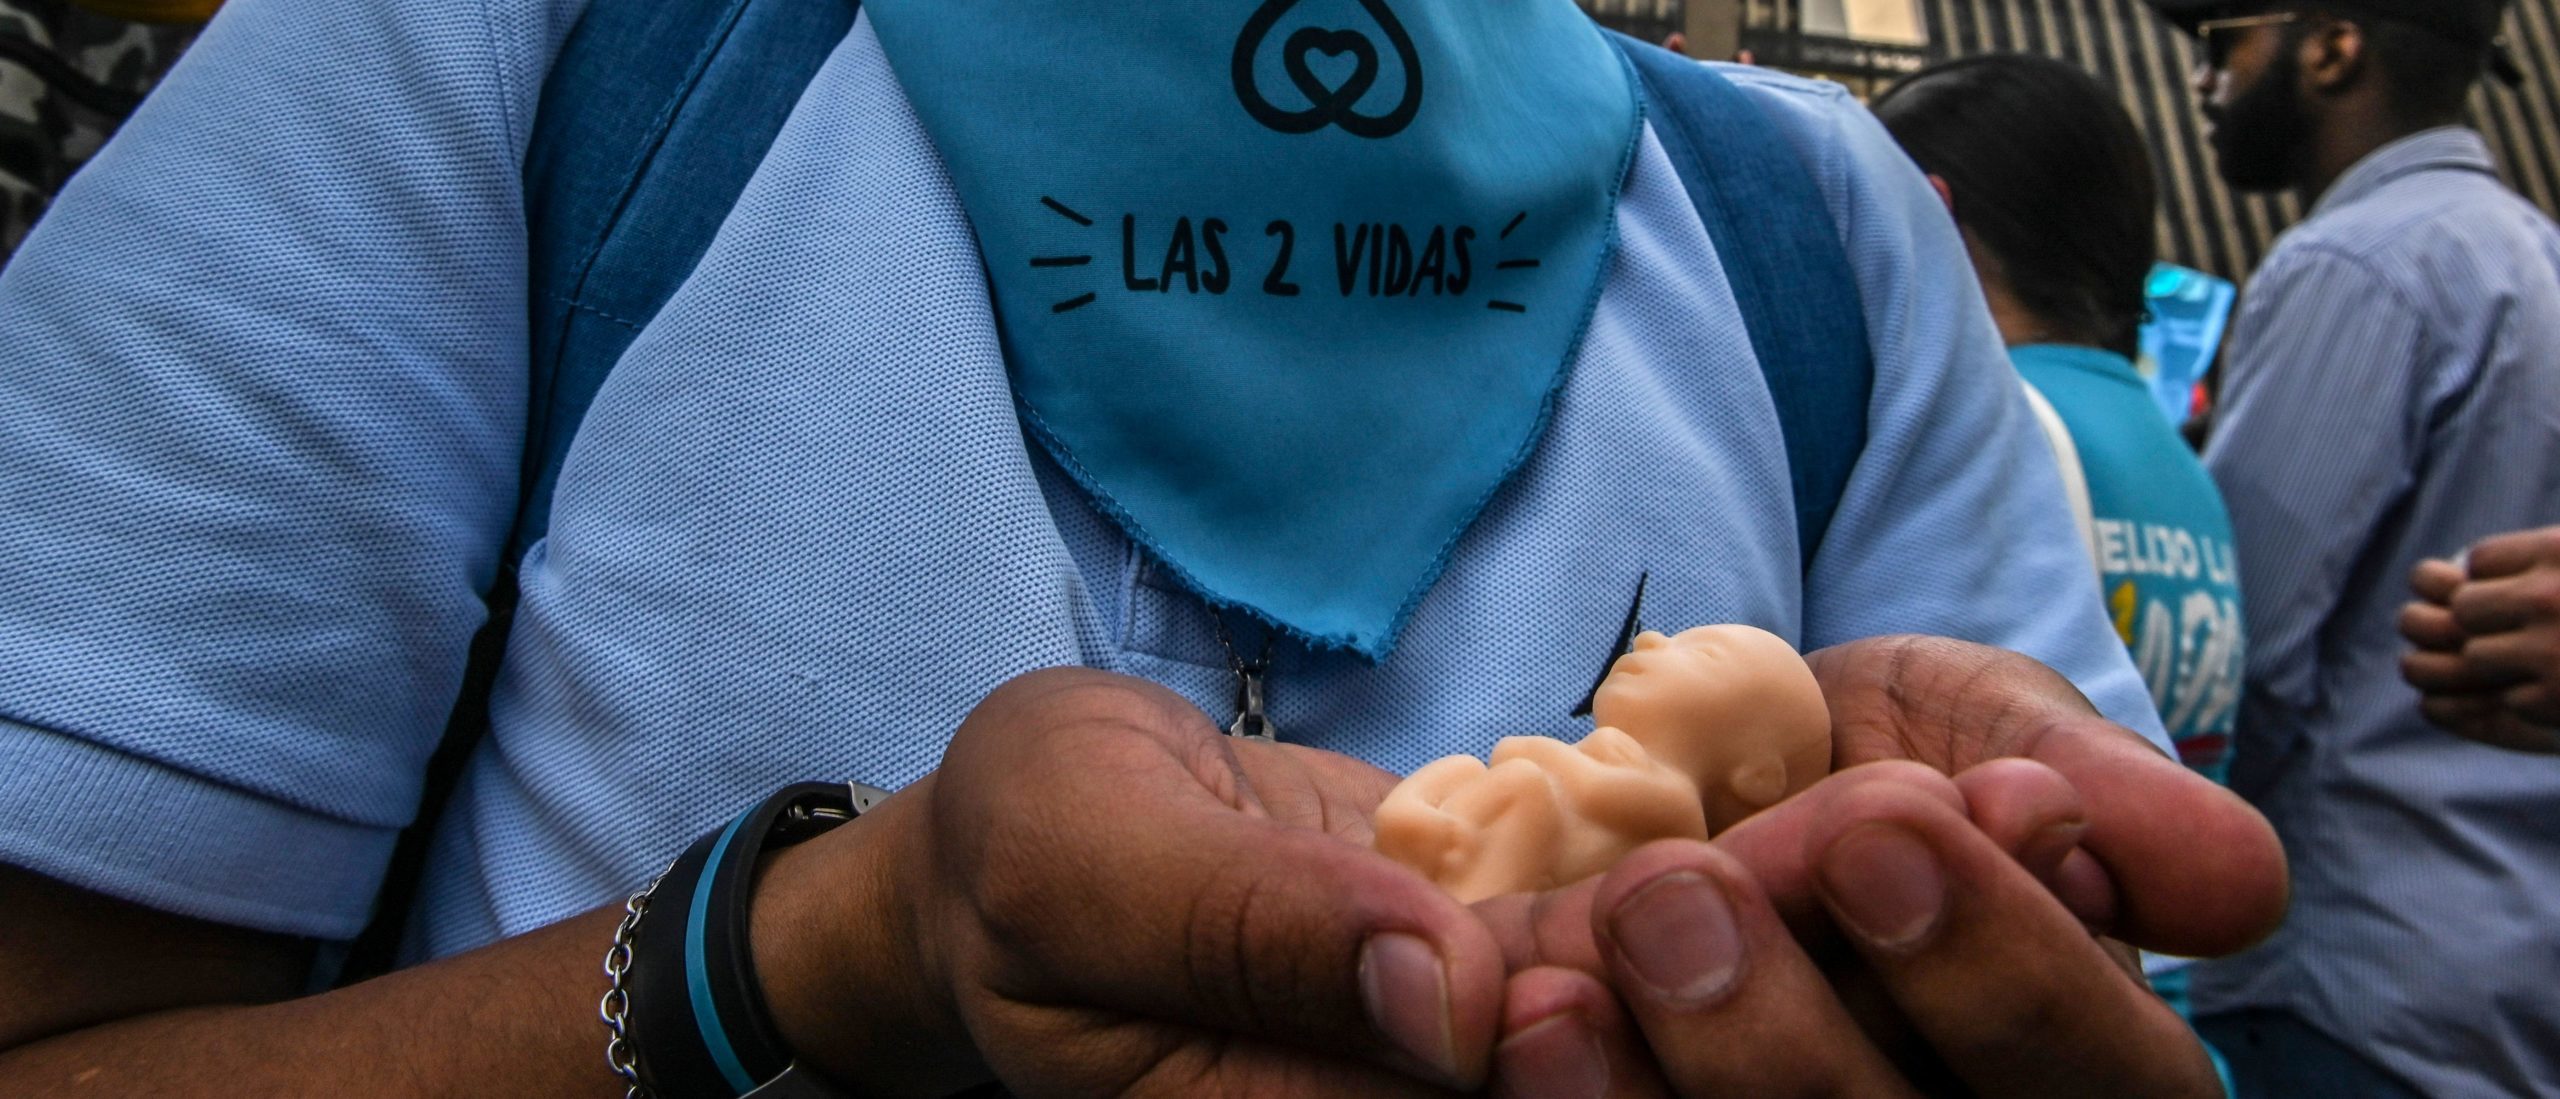 A man wearing a blue headscarf reading "The two lives", holds a replica of a fetus during a protest against the legalization of abortion in Medellin, Colombia, on February 19, 2020. (Photo by JOAQUIN SARMIENTO / AFP)